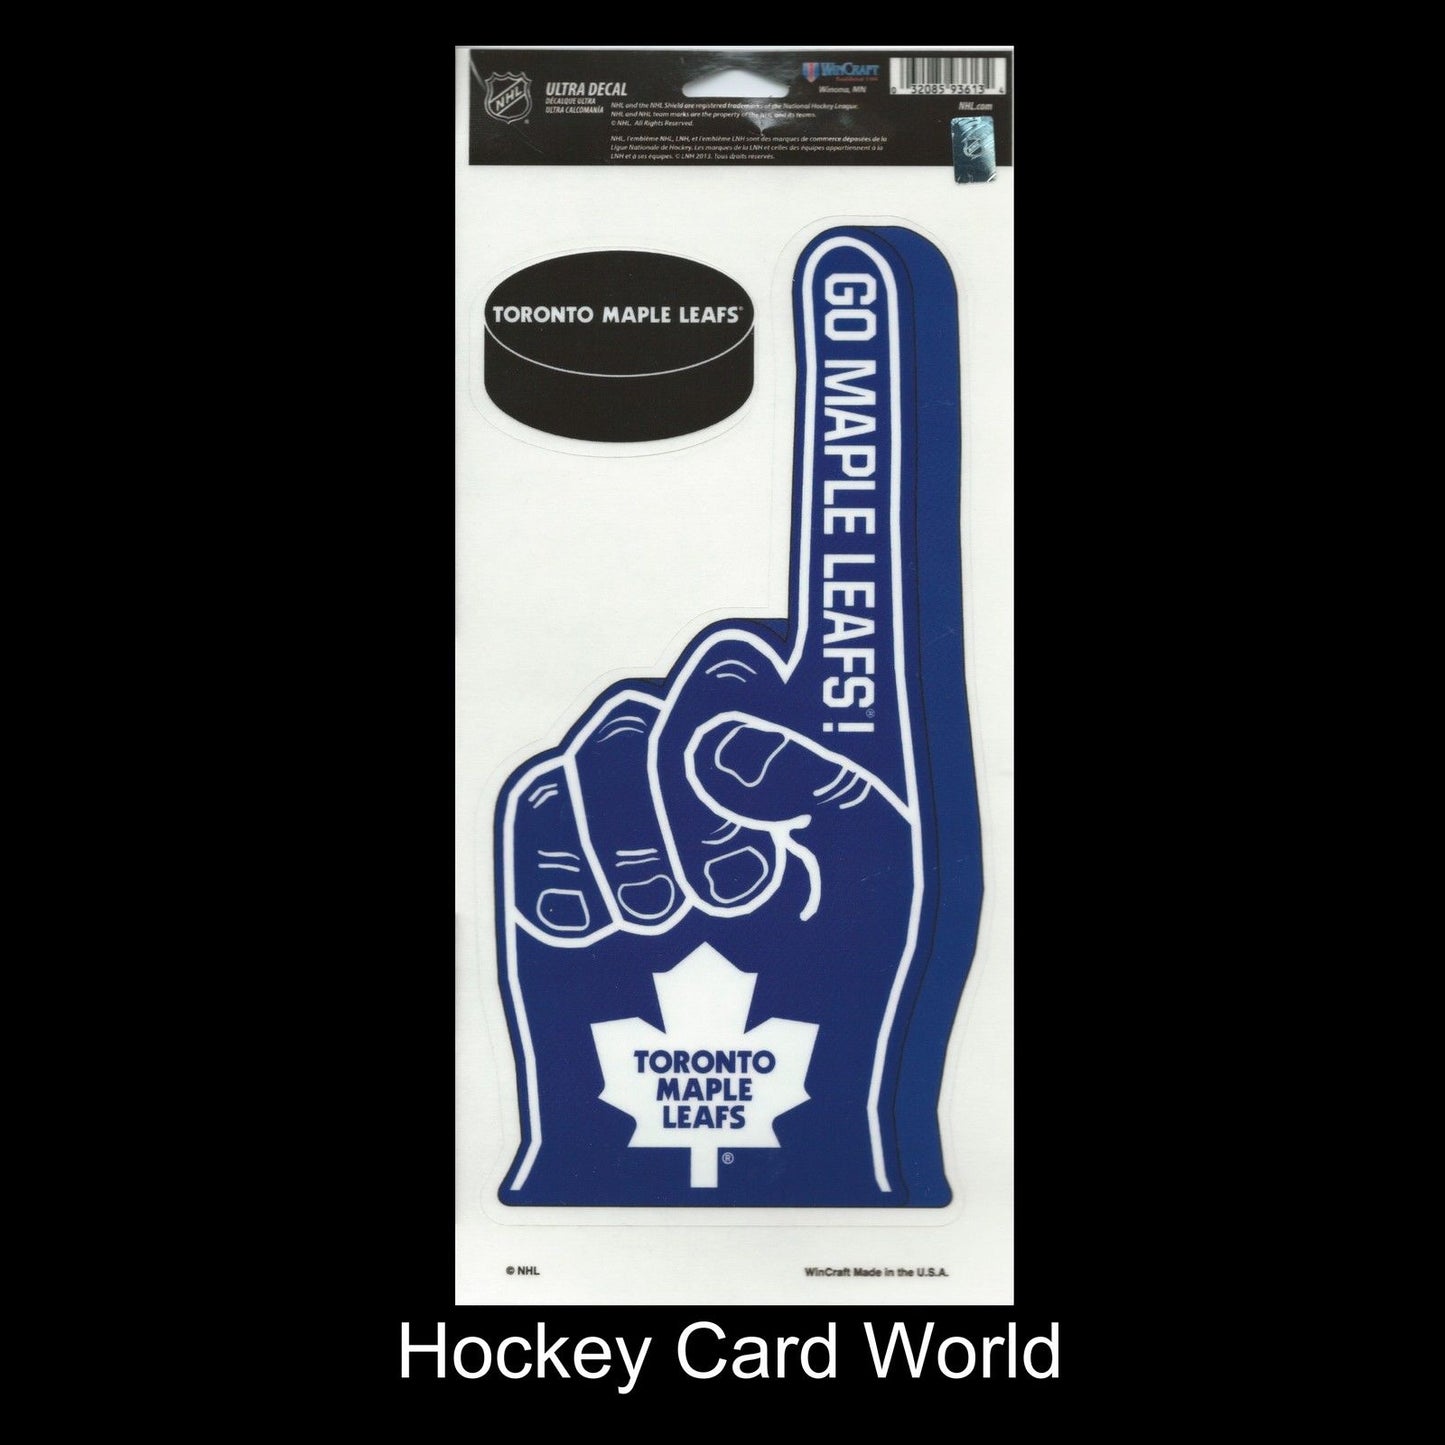  Toronto Maple Leafs Multi-Use Decal/Sticker 2 Pack Finger/Puck NHL 4"x 9" Image 1